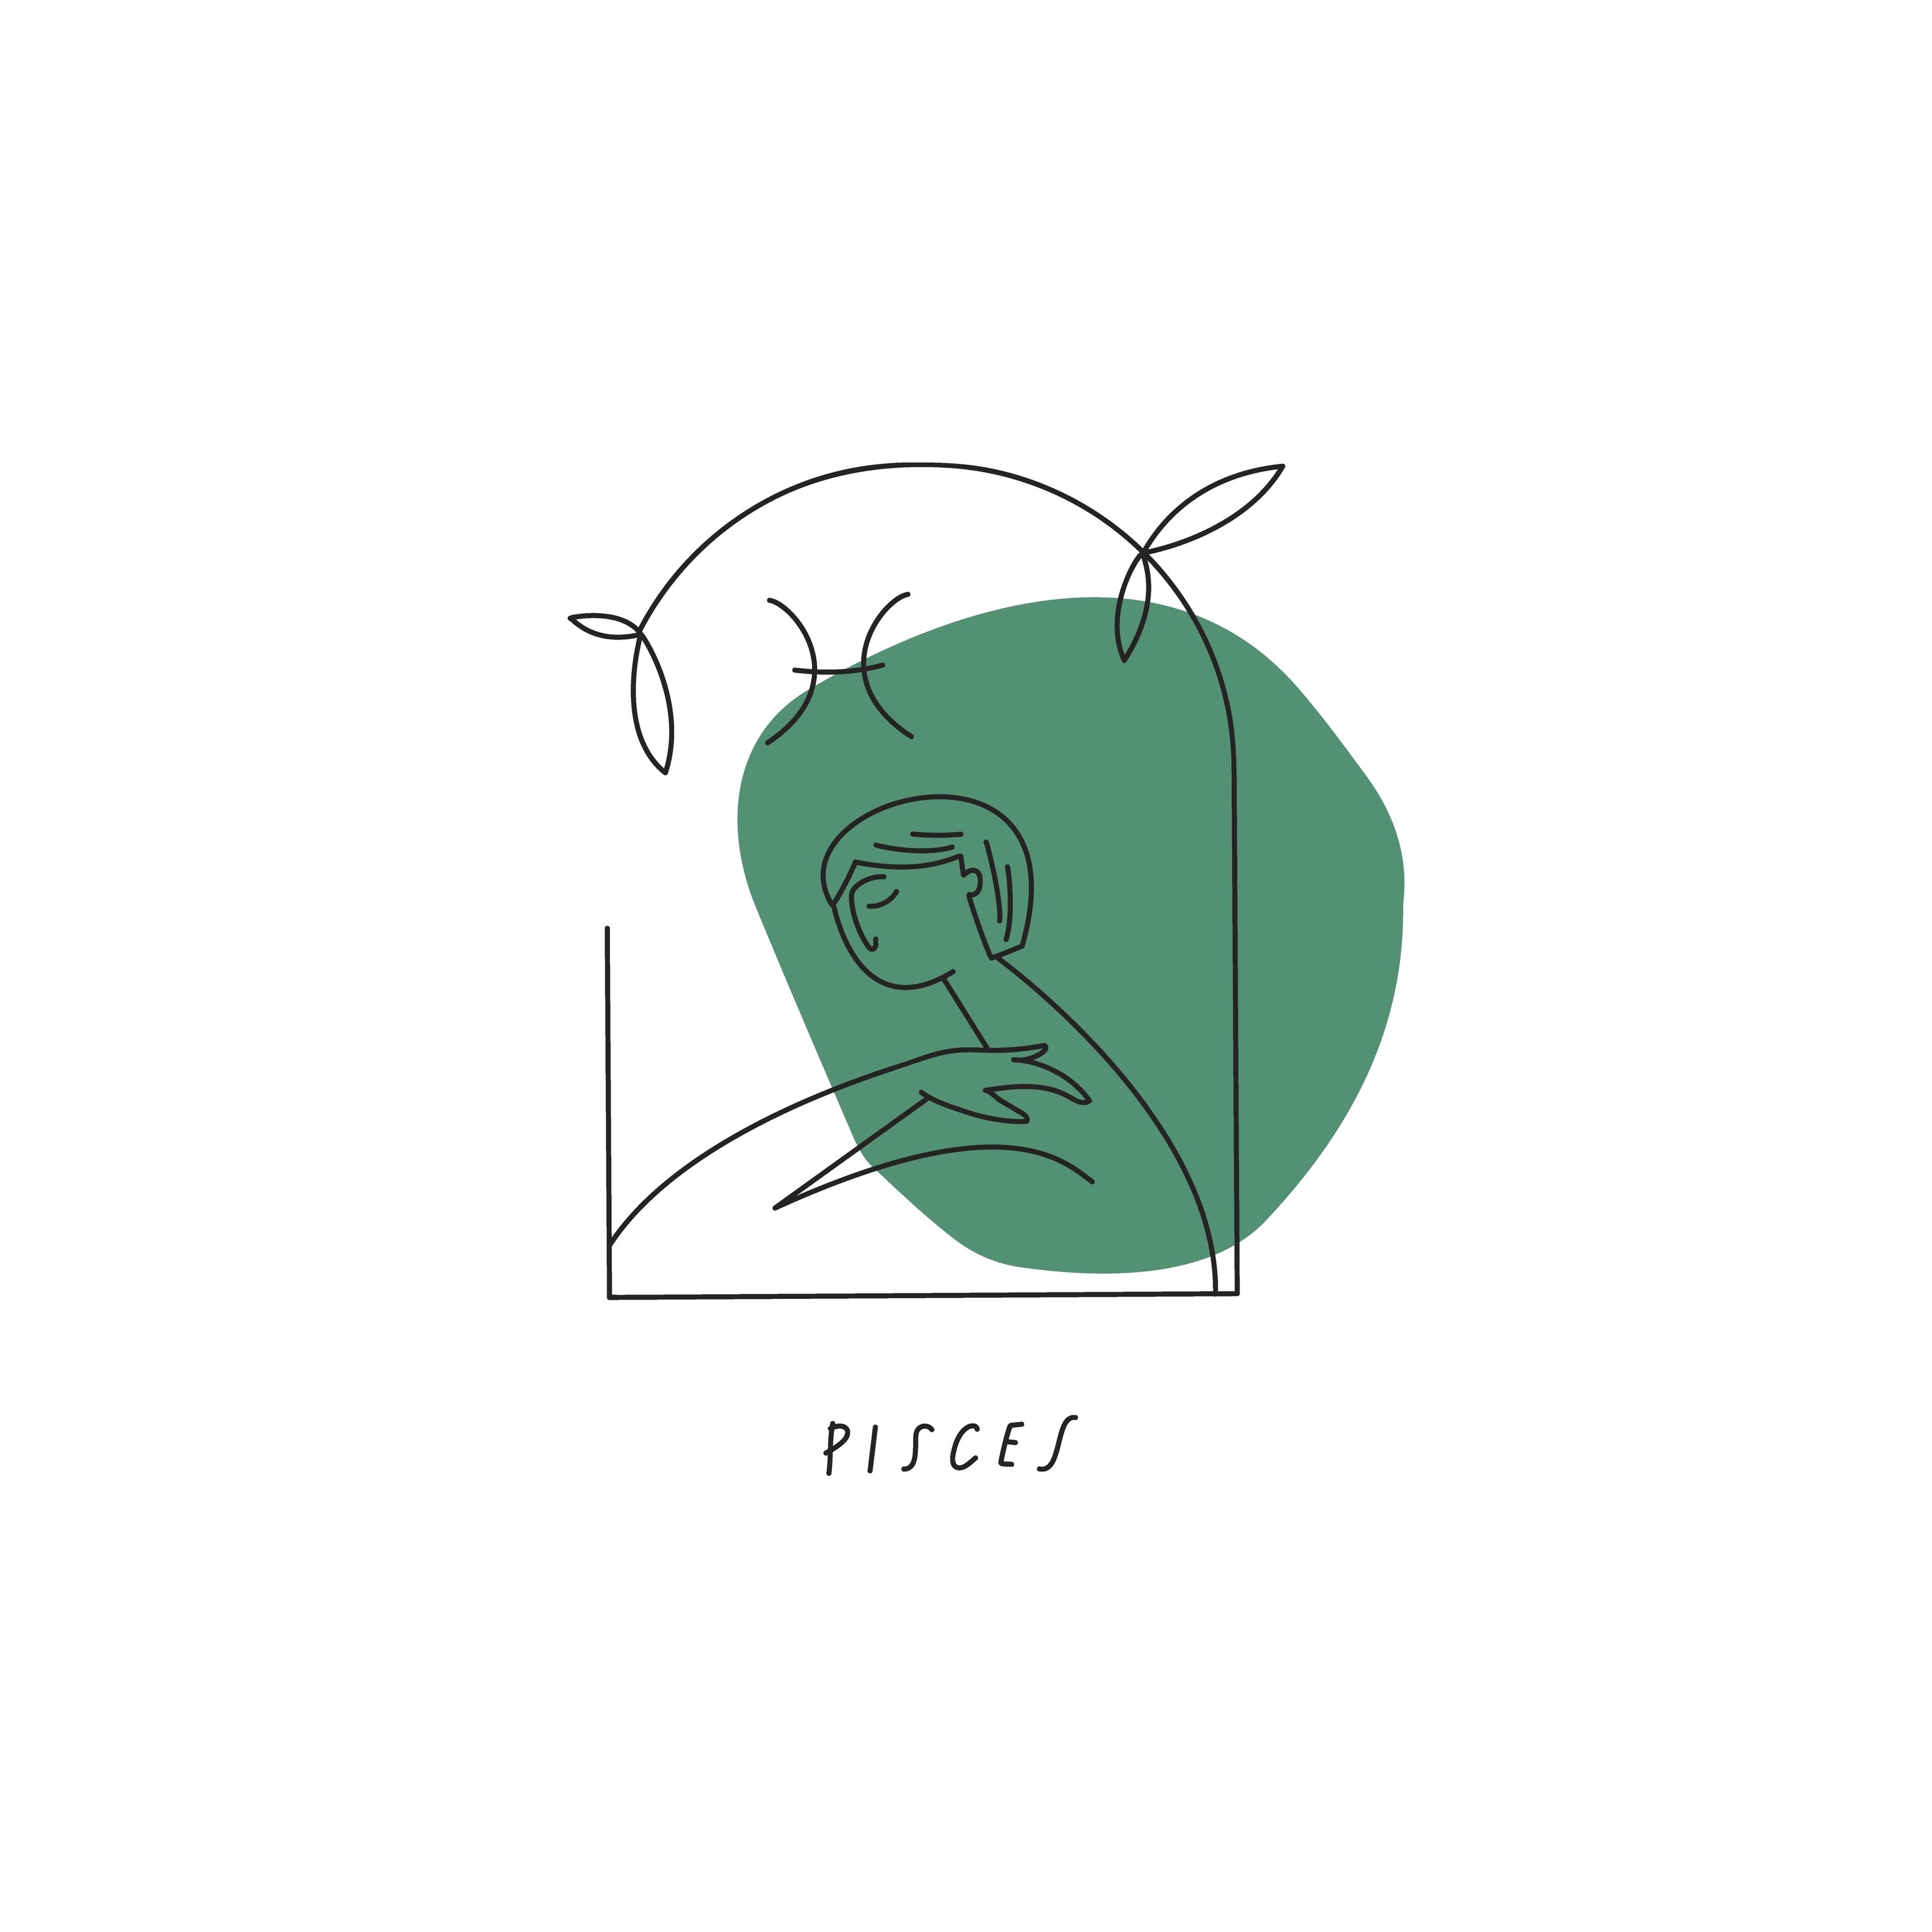 Pisces zodiac sign illustration with green watercolor